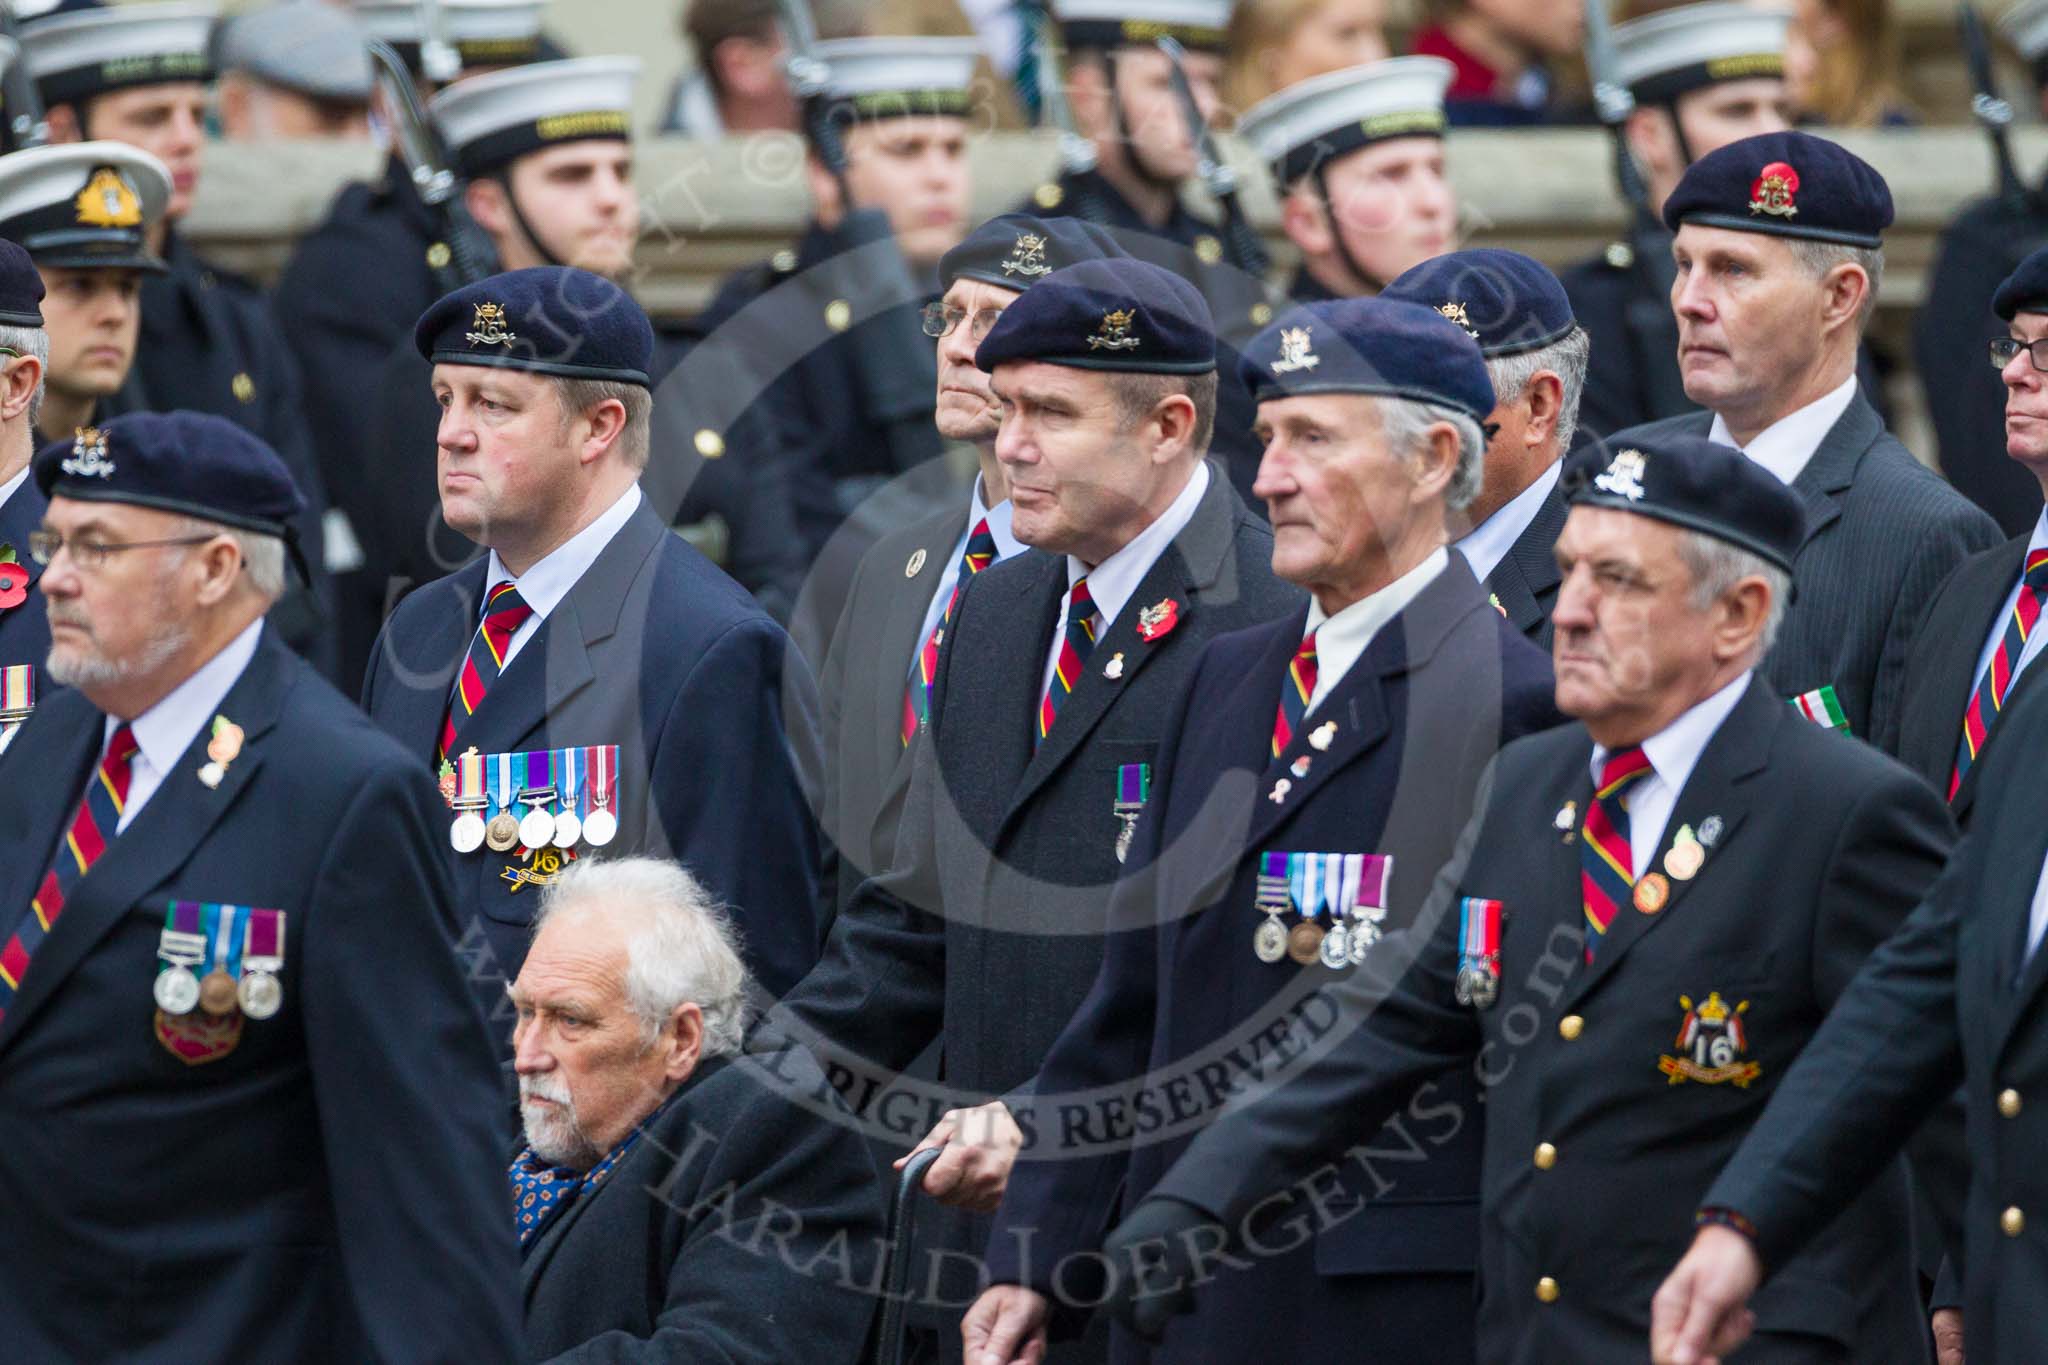 Remembrance Sunday at the Cenotaph 2015: Group B26, 16/5th Queen's Royal Lancers.
Cenotaph, Whitehall, London SW1,
London,
Greater London,
United Kingdom,
on 08 November 2015 at 11:41, image #206